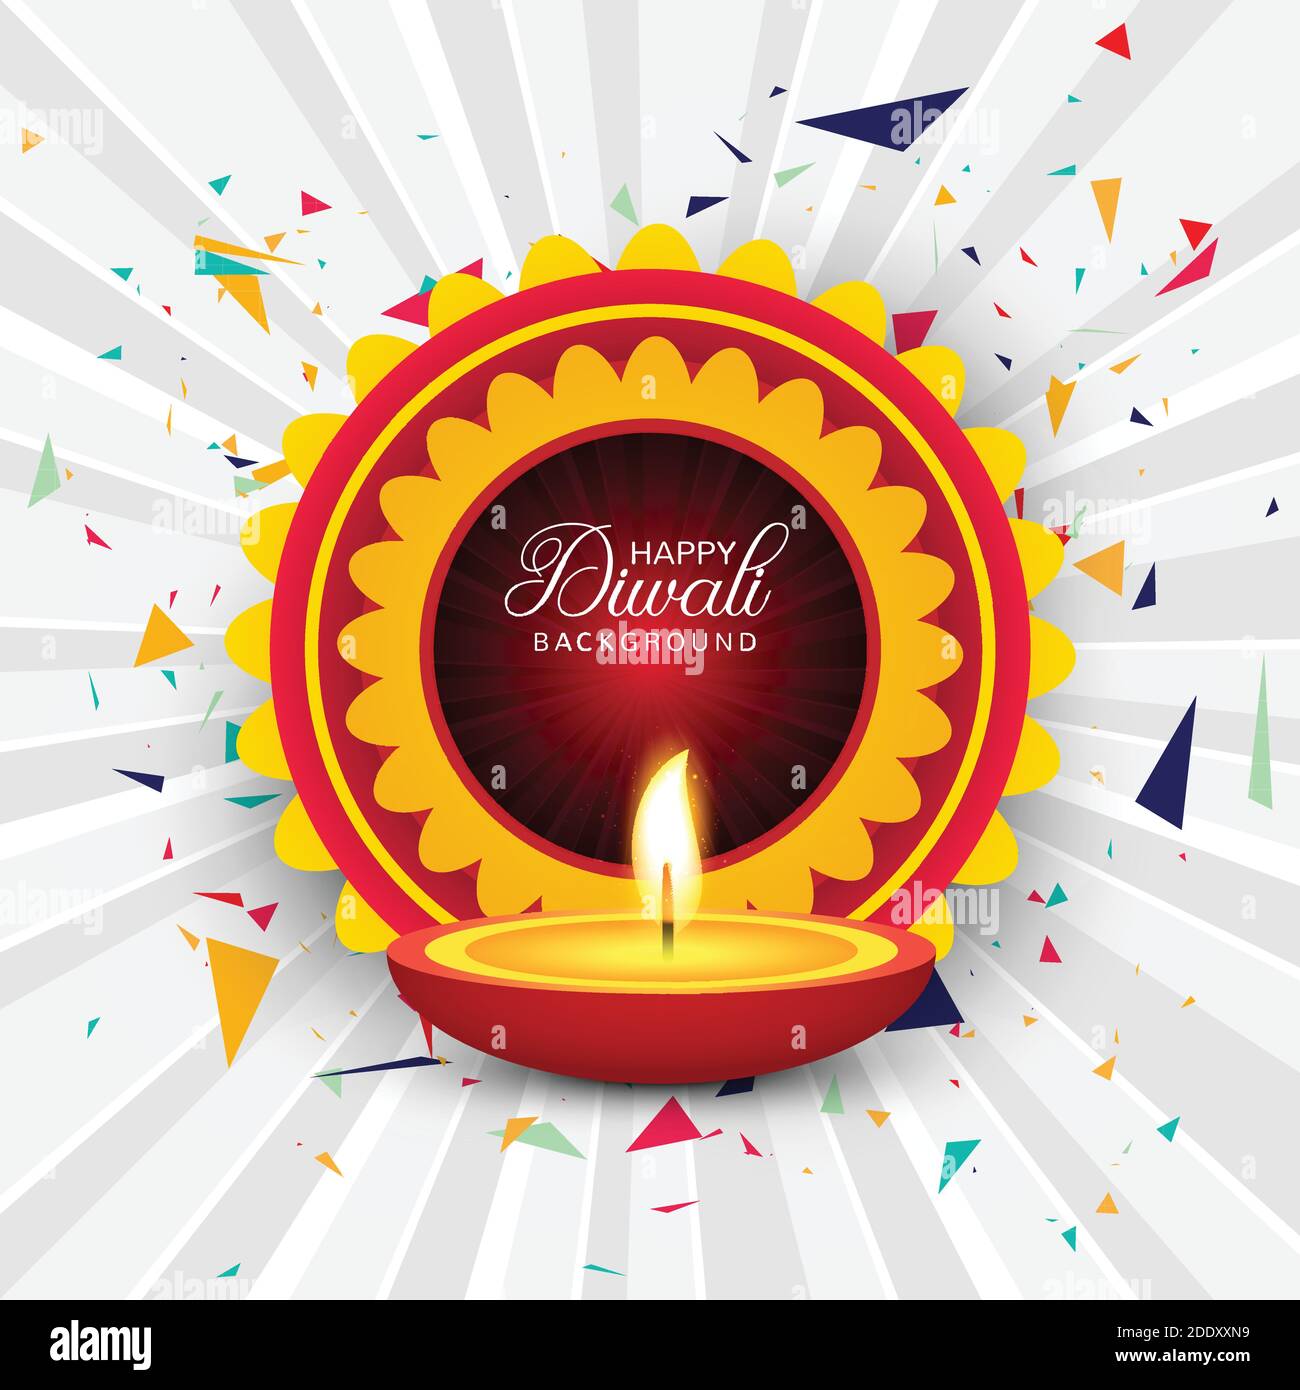 Diwali background Cut Out Stock Images & Pictures - Alamy